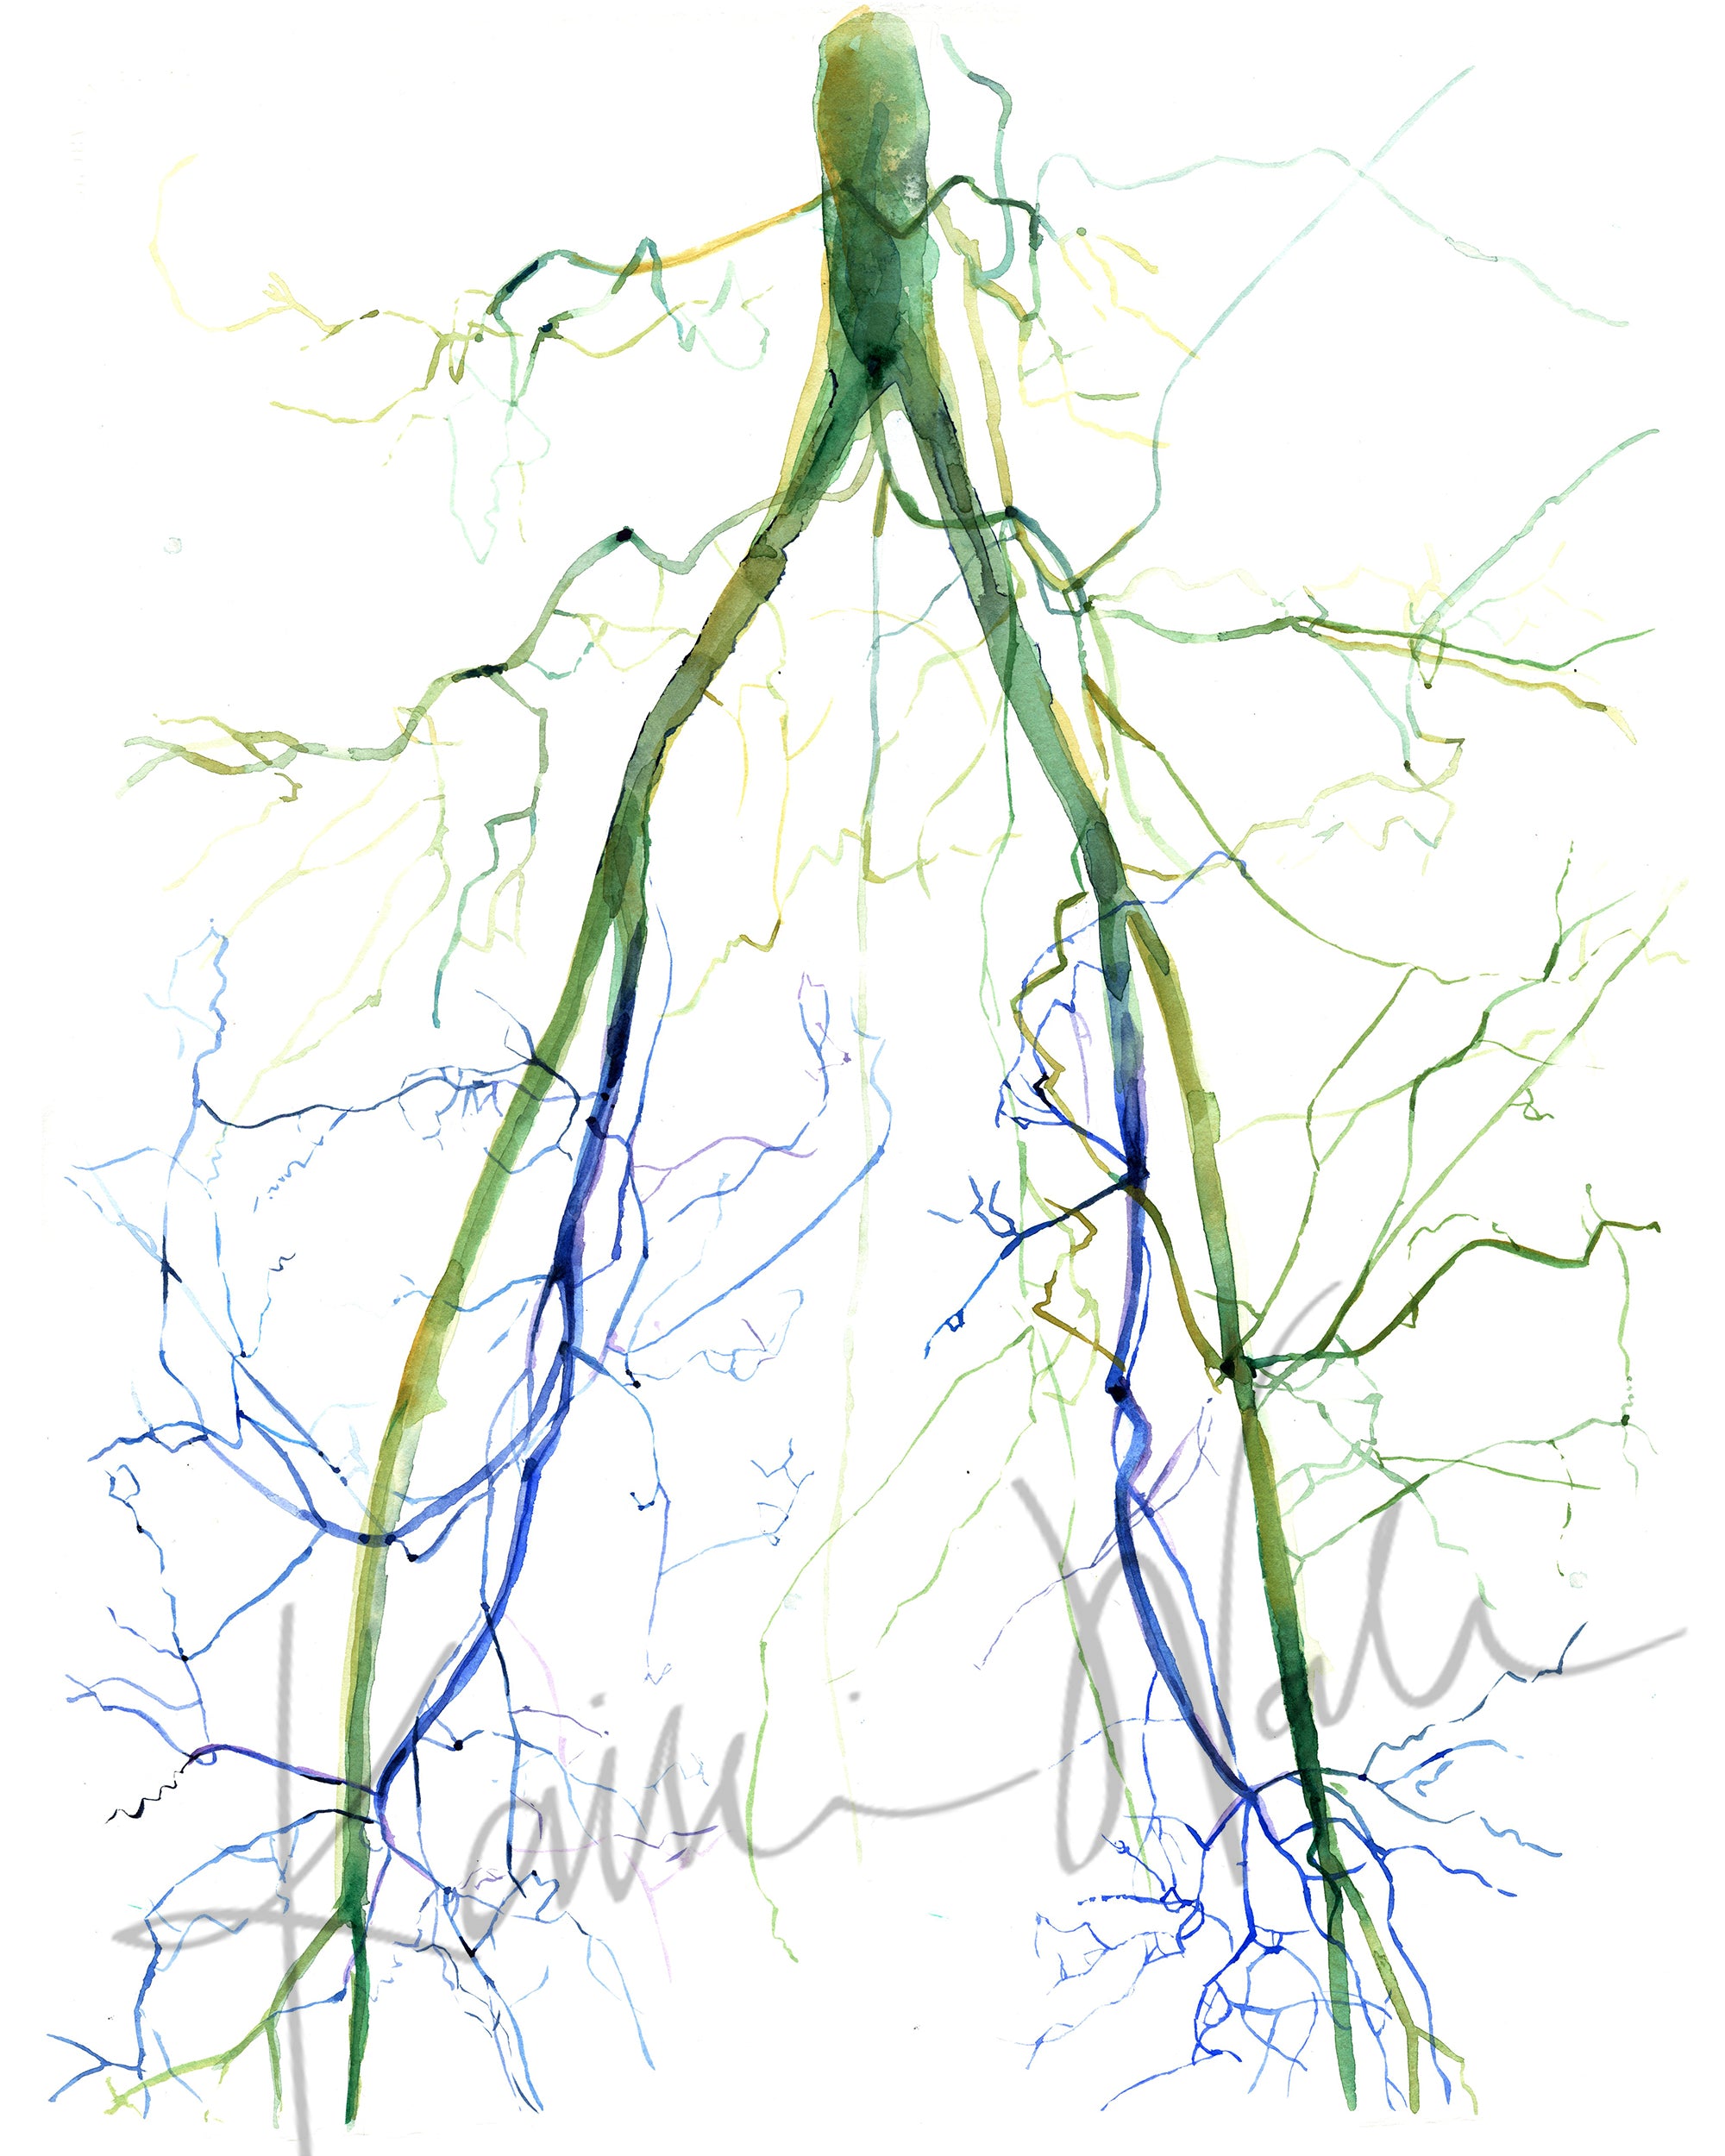 Unframed watercolor painting of two angiograms combined into one. The painting shows the before of a blocked iliac artery and an after, unblocked iliac artery.